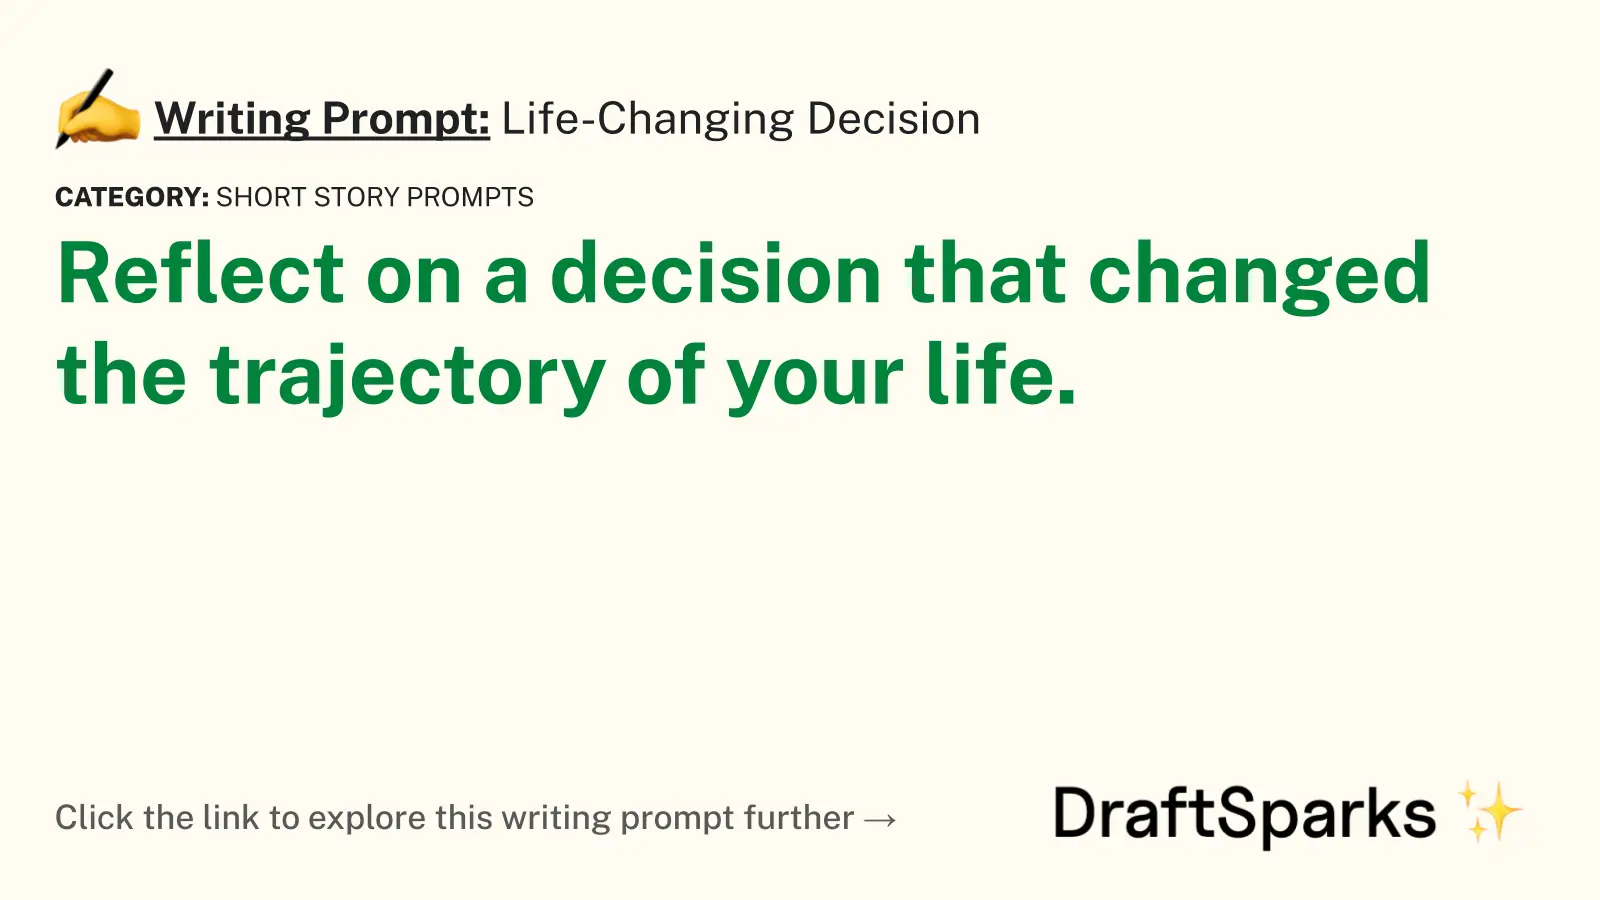 Life-Changing Decision